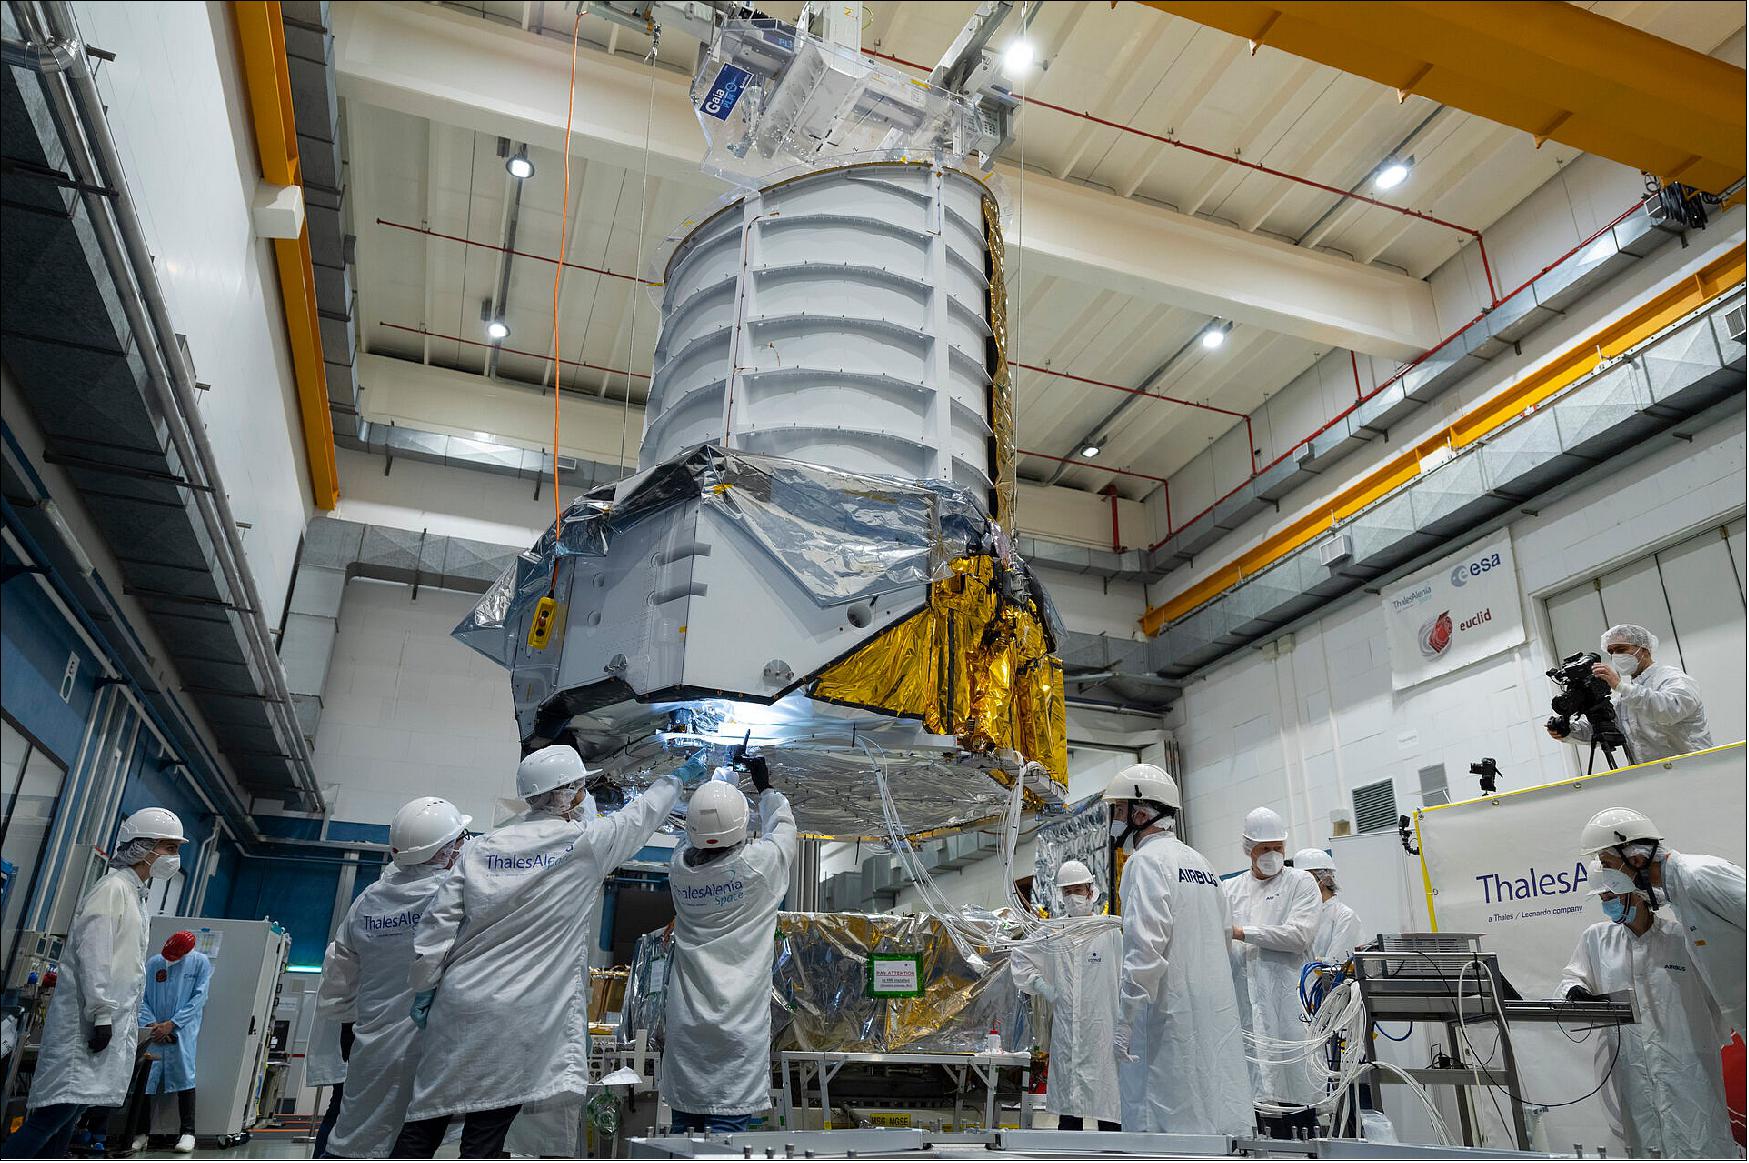 Figure 19: On 24 March 2022, ESA came one step closer to unveiling the mysteries of the dark Universe, following the coming together of two key parts of the Euclid spacecraft – the instrument-carrying payload module and the supporting service module. This image shows the 800 kg payload module being lifted by a crane, just before it was lowered onto the service module. Euclid’s instruments were integrated onto the payload module at the end of 2020. During 2021, the complete module successfully passed intensive testing under simulated space conditions to check that the telescope and instruments work as expected (image credit: ESA - S. Corvaja)